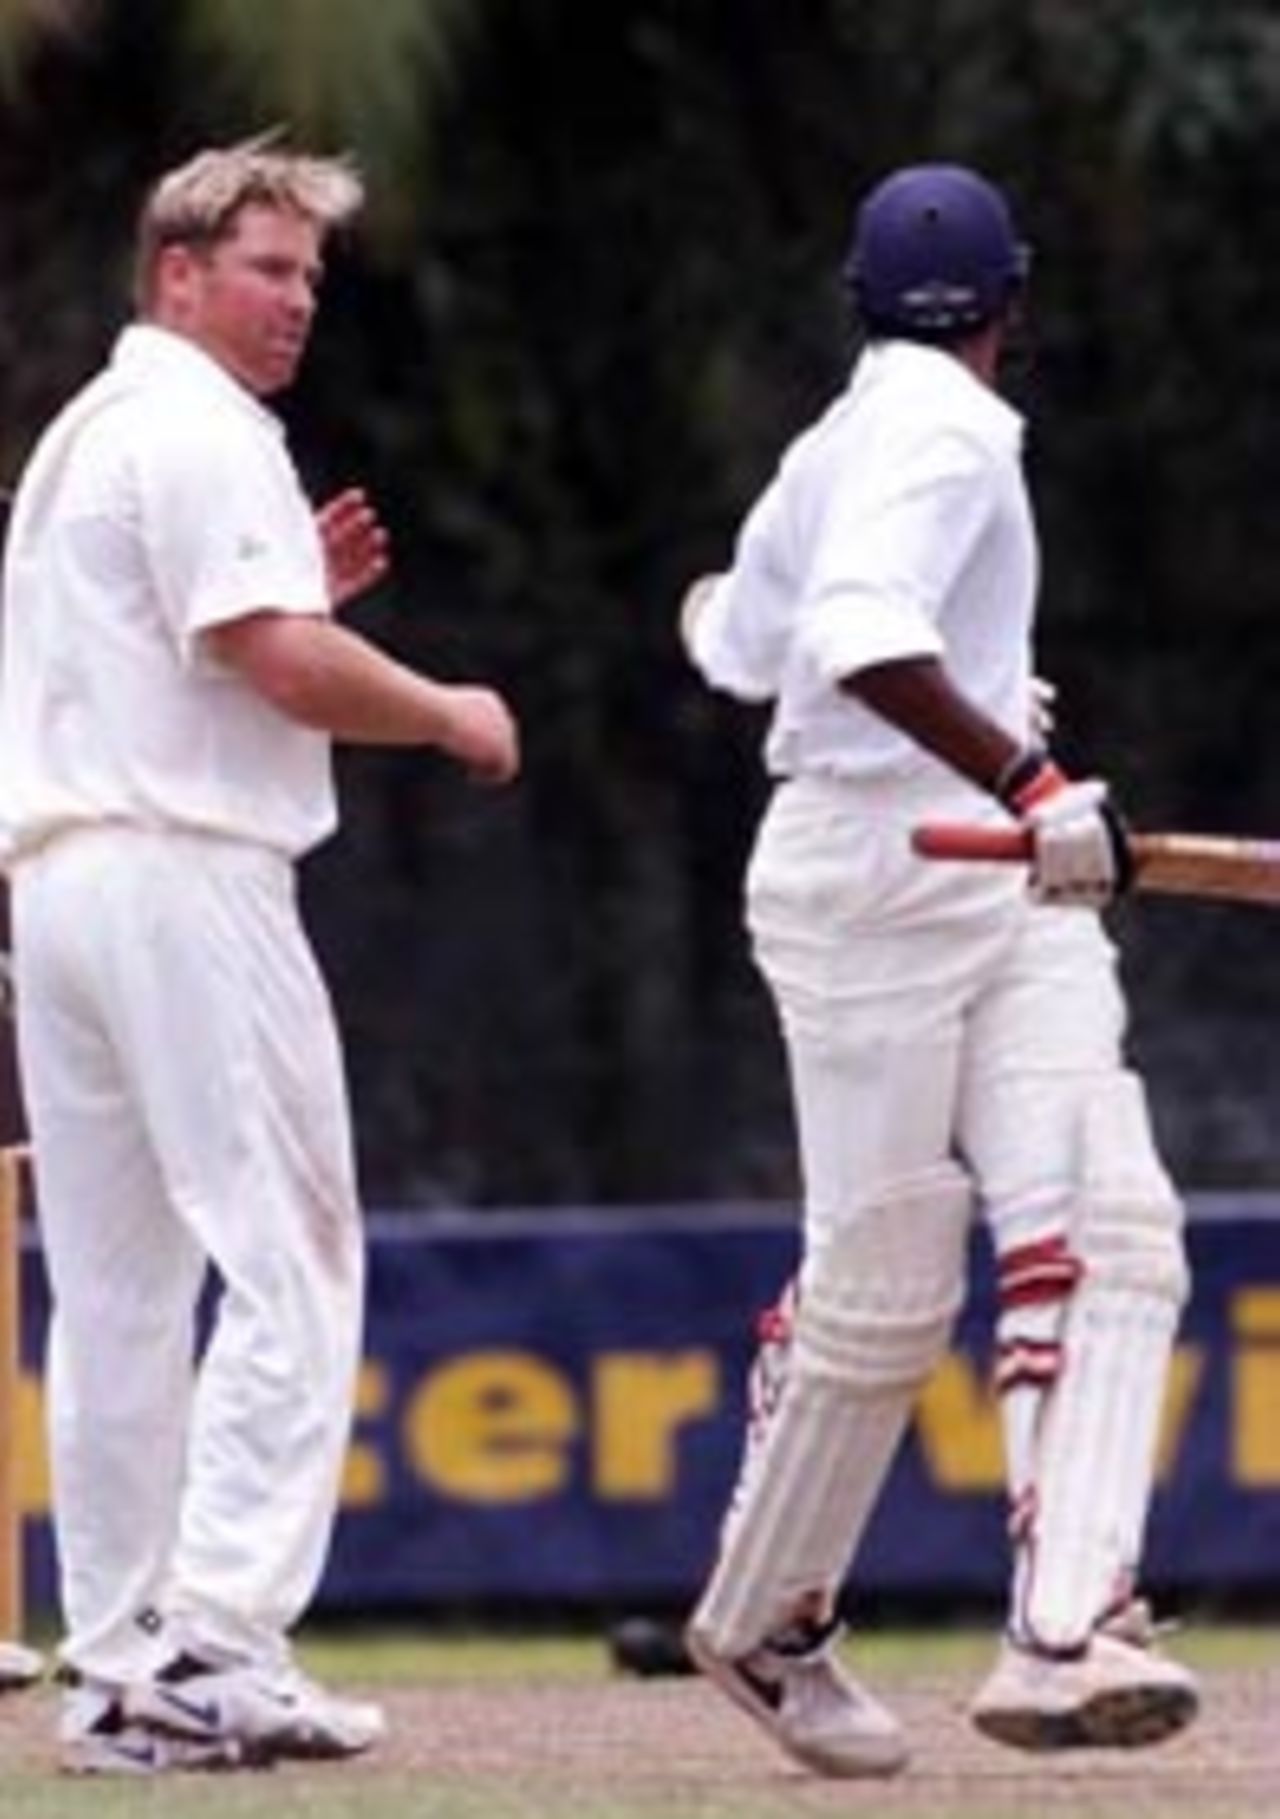 5 Sep 1999: Shane Warne (left) of Australia exchanges words with Pradeep Hewage of the Board XI after they collided mid pitch, during day three of the tour match between the Sri Lanka Board XI and Australia at Saravanamuttu Stadium, Colombo, Sri Lanka.